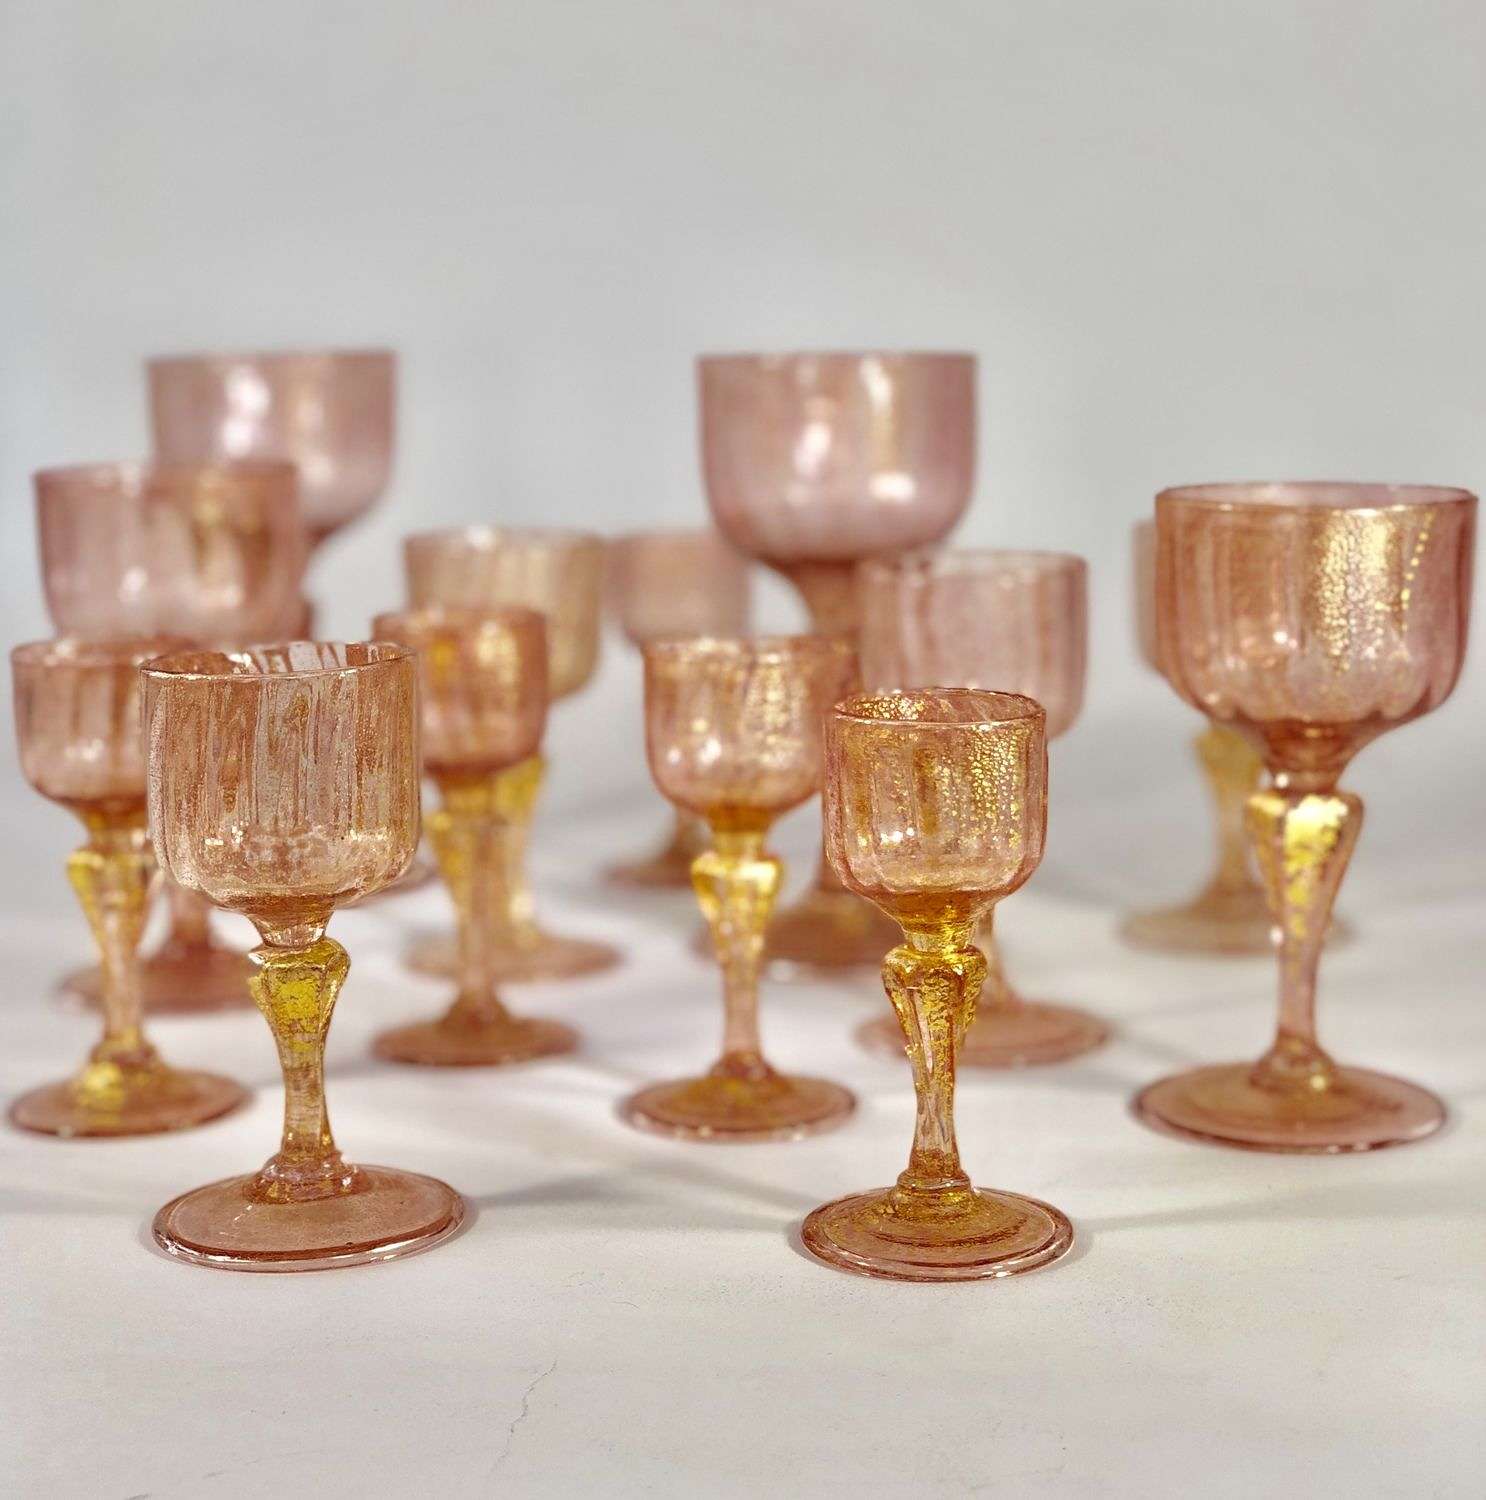 Pretty set of pink and gold Venetian after dinner glasses